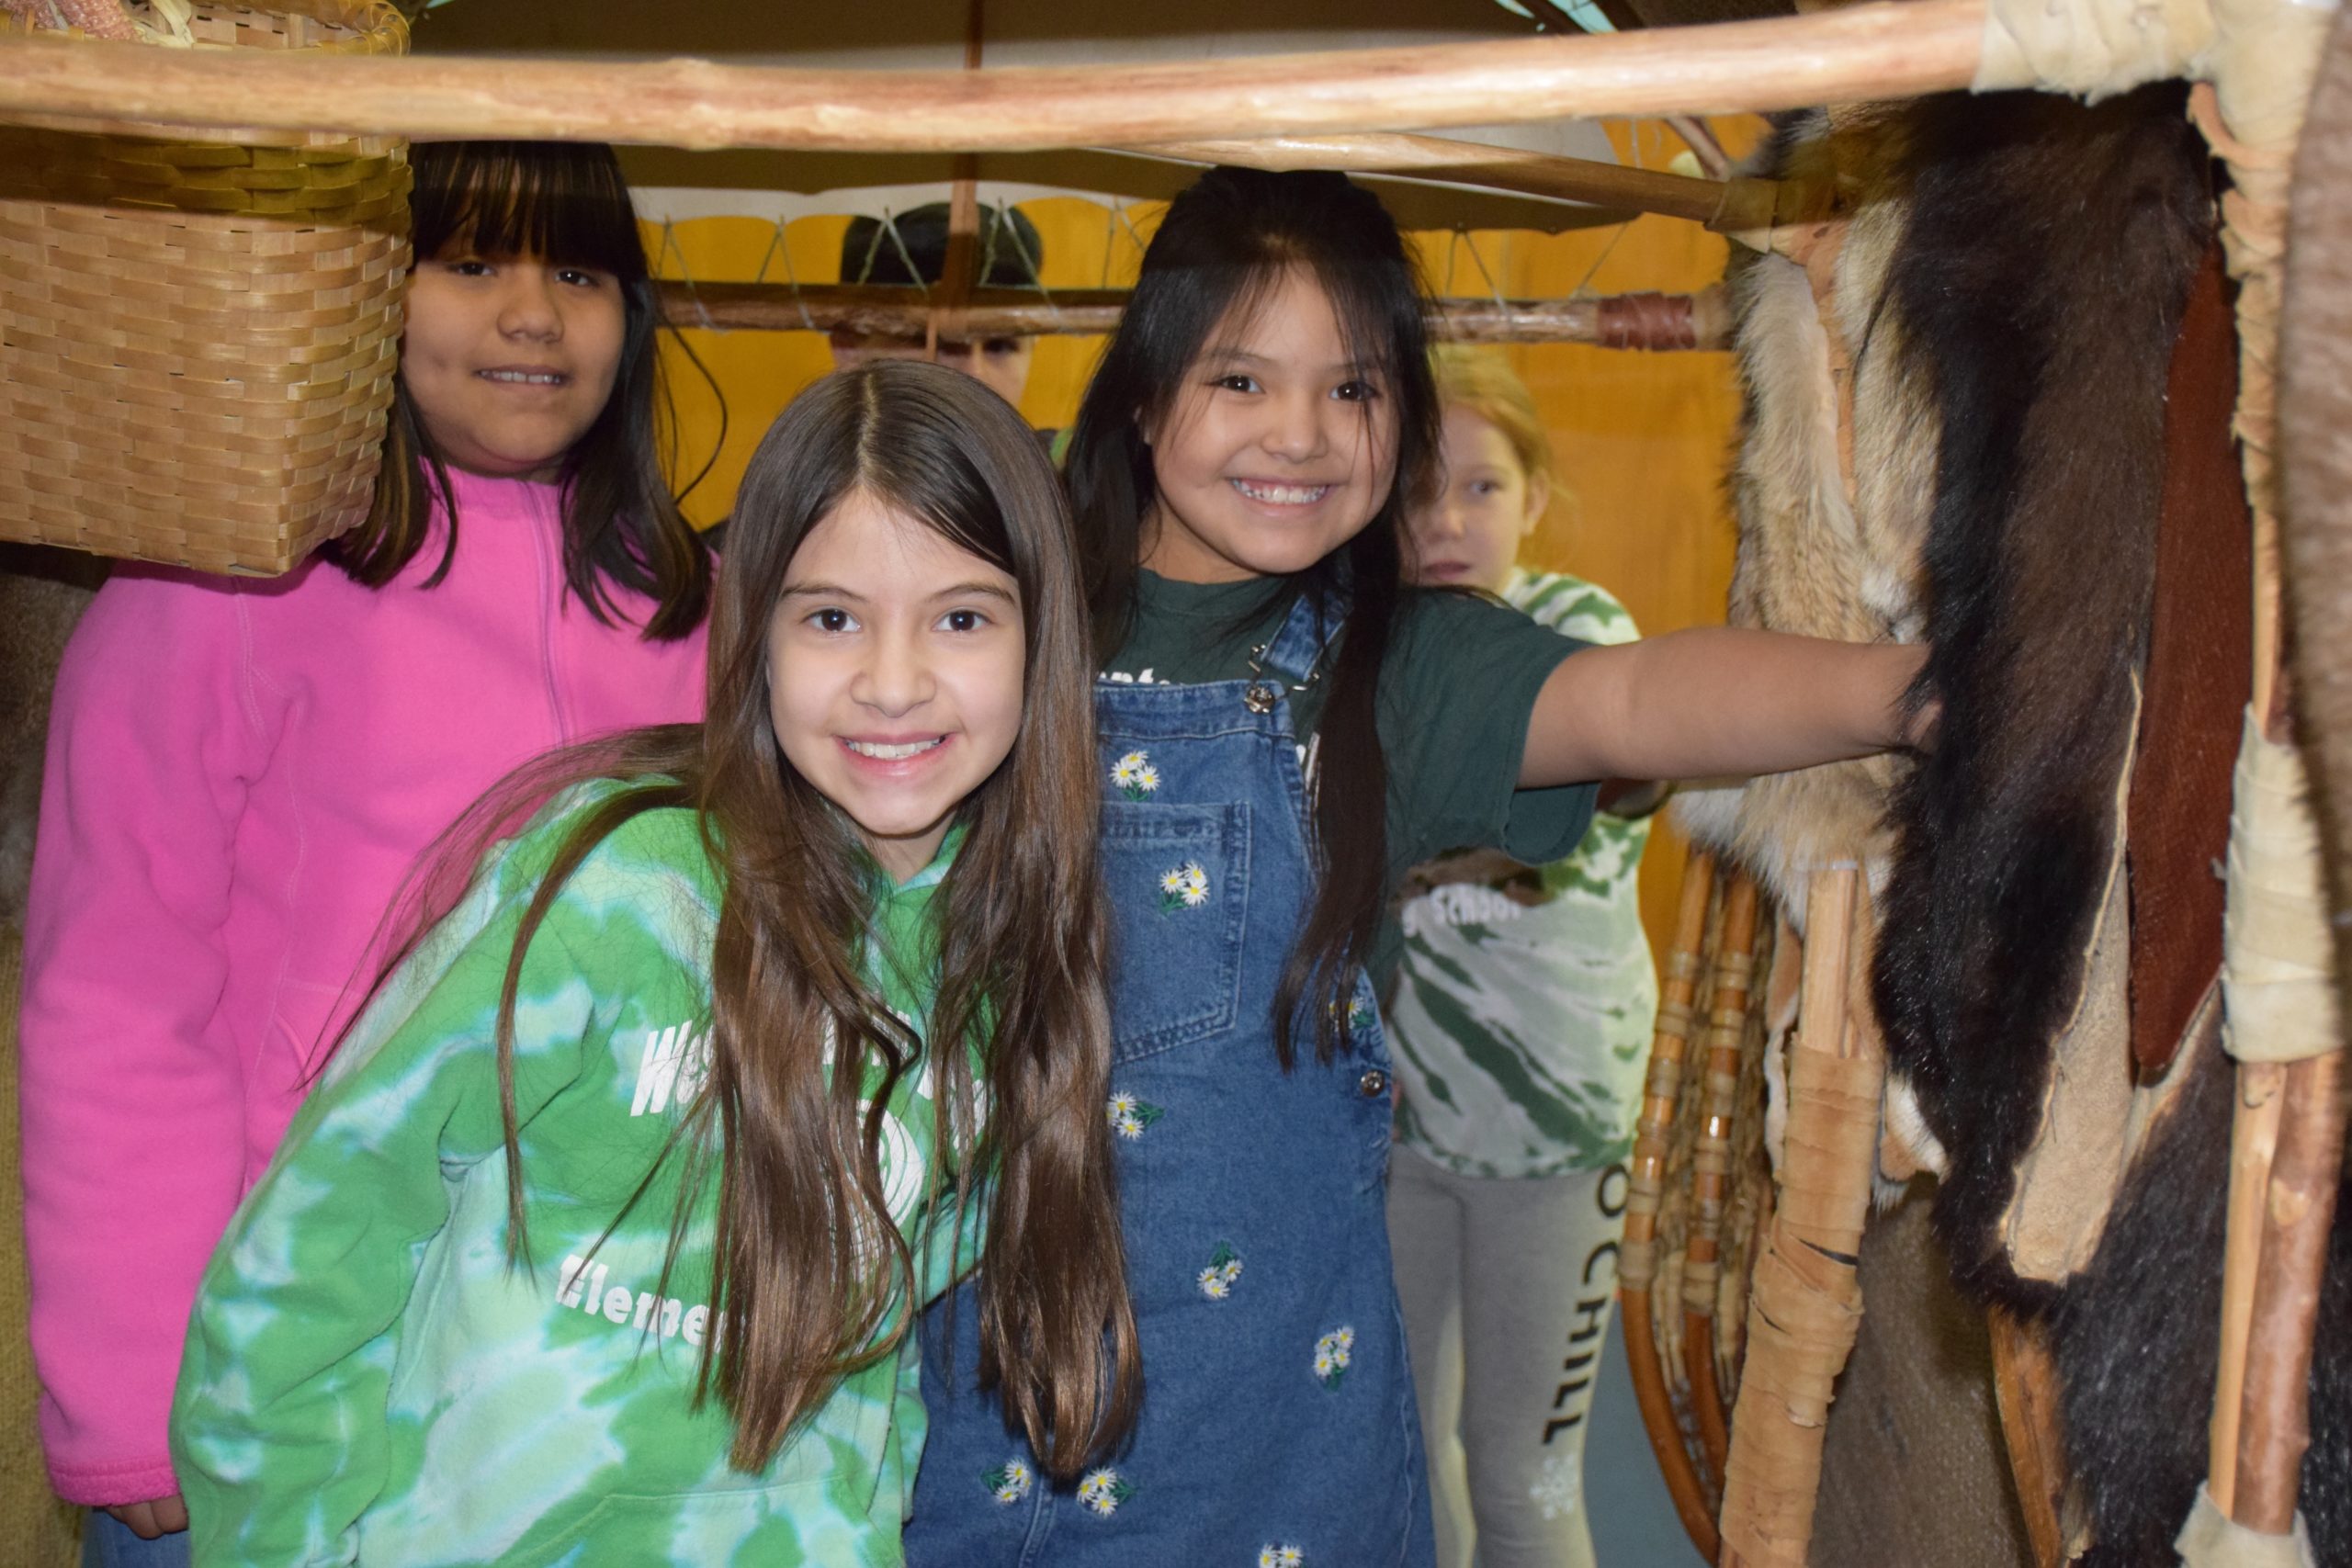 Westhampton Beach Elementary School fourth graders explored Native American artifacts during a special hands-on program, Journeys into American Indian Territory, an annual program sponsored by the PTA.